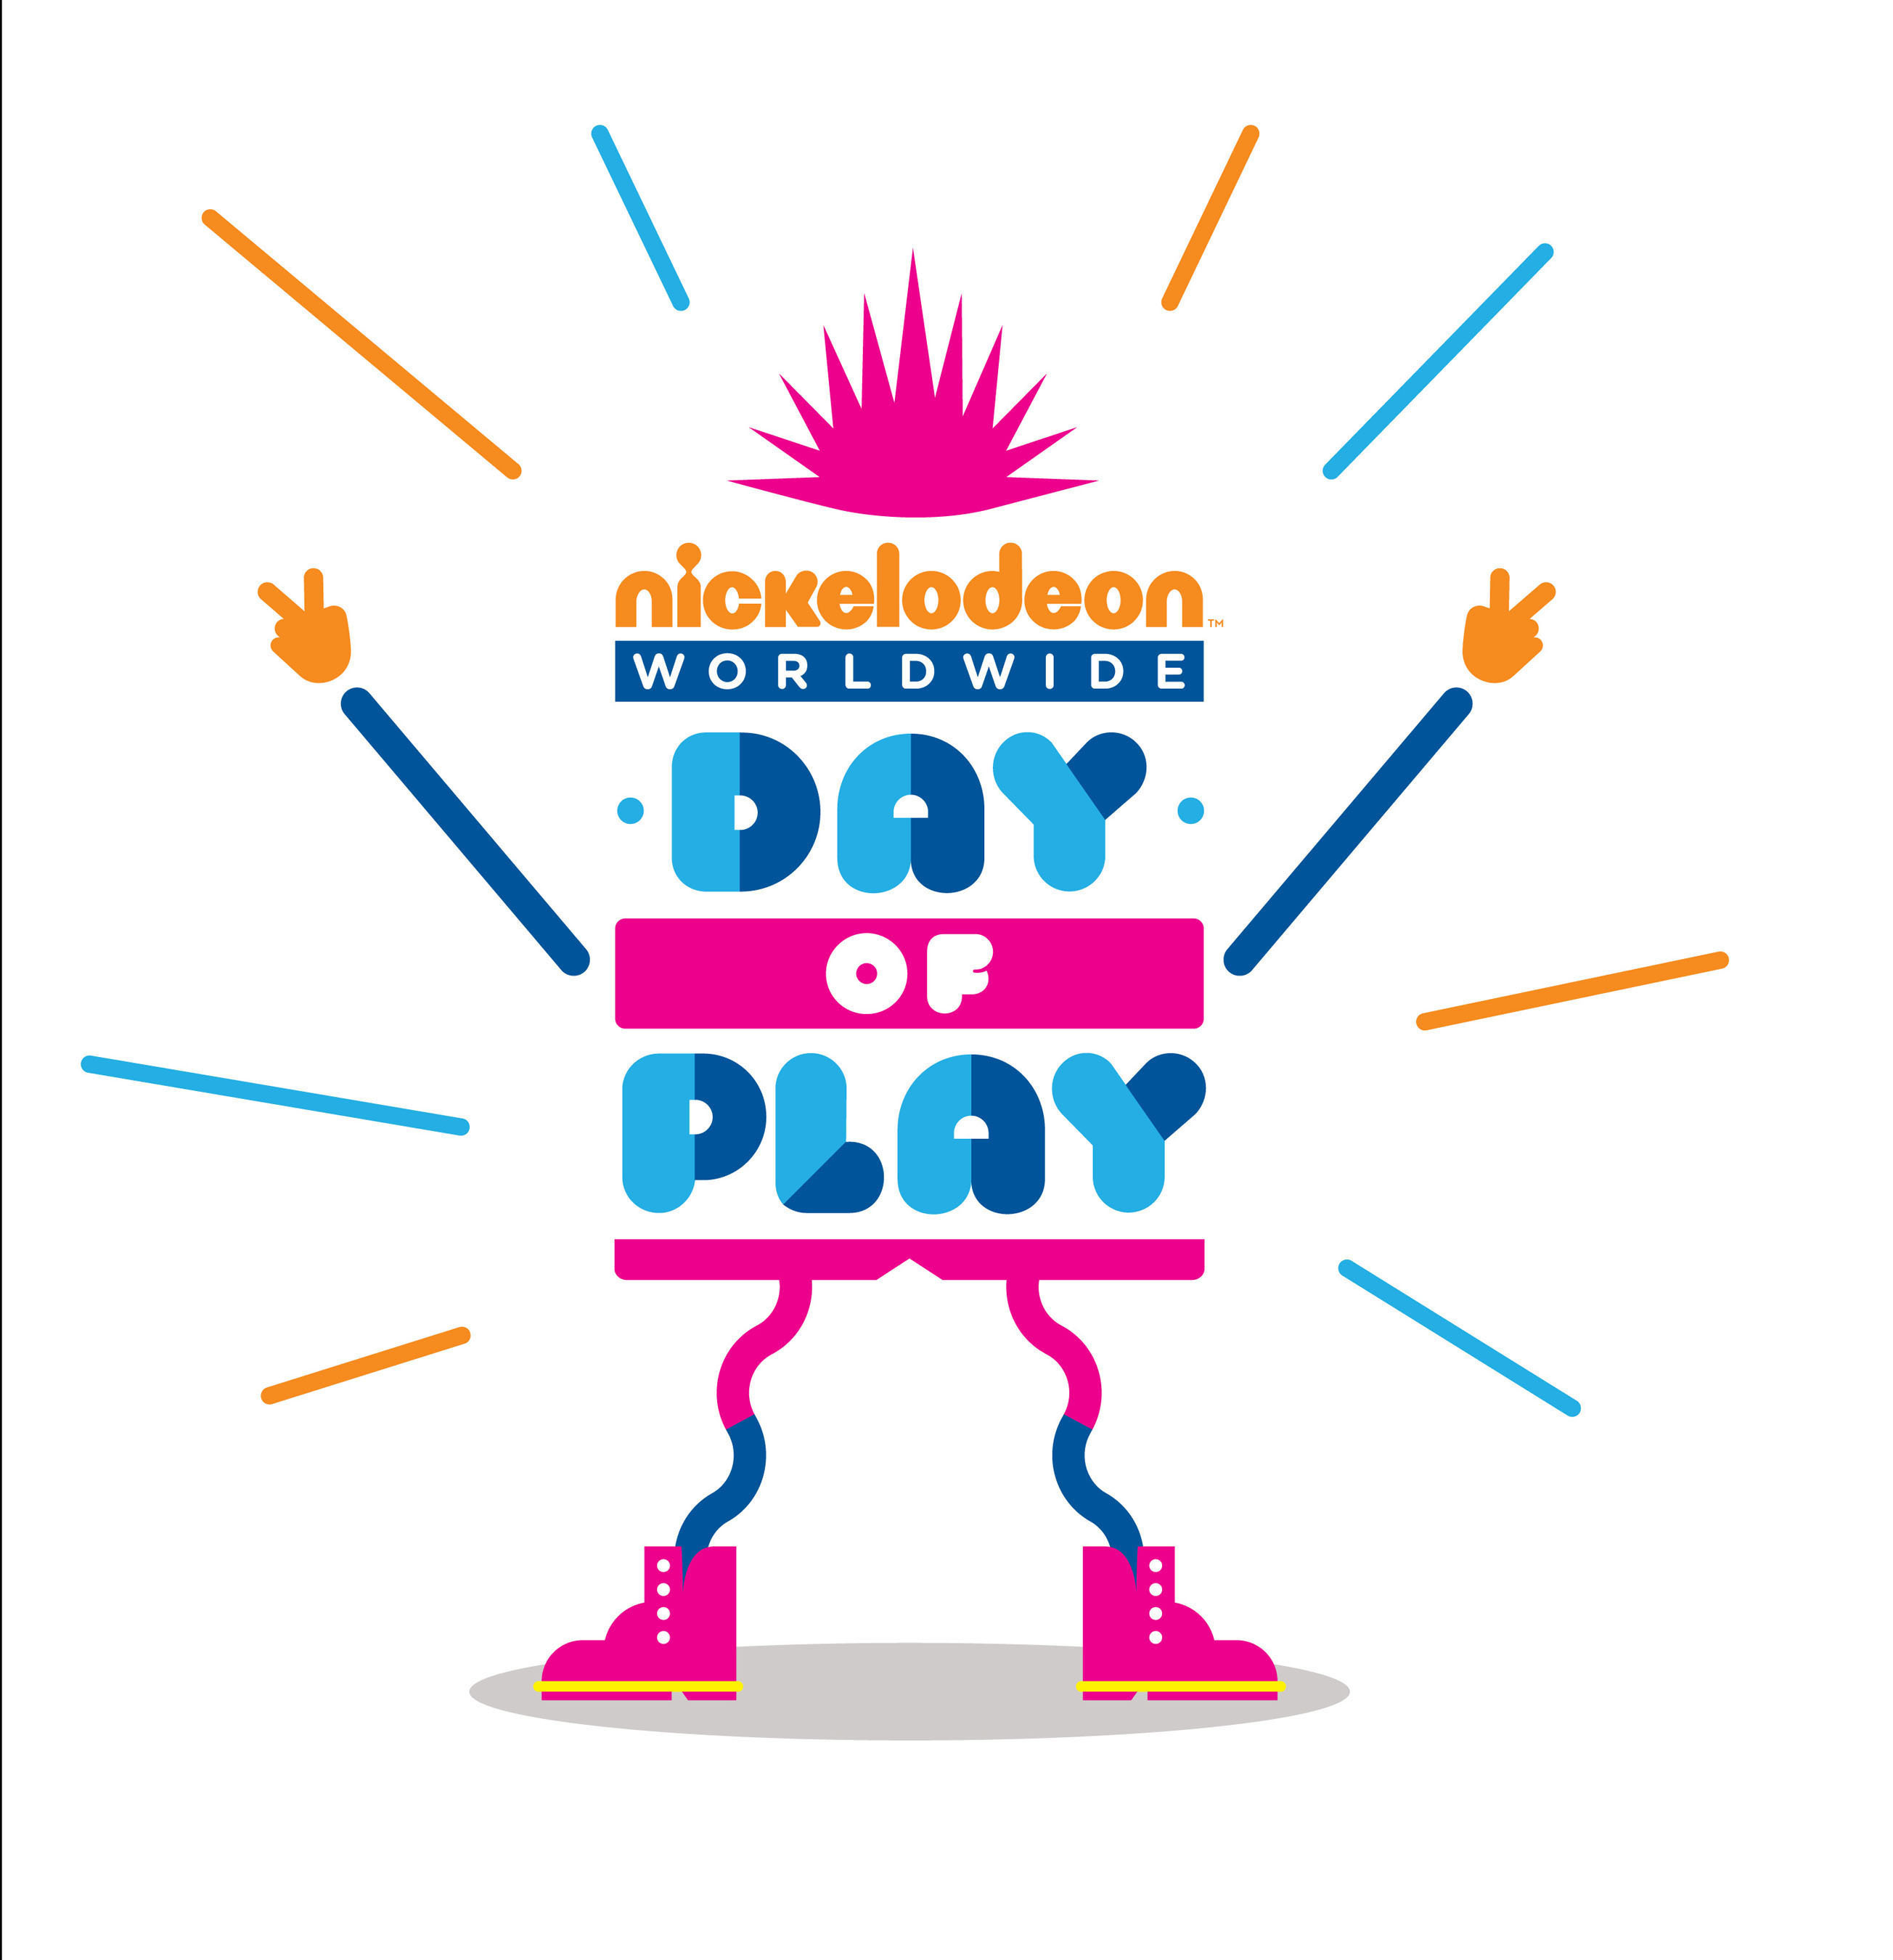 NICKELODEON CELEBRATES 10TH ANNUAL WORLDWIDE DAY OF PLAY WITH FULL WEEK OF PUBLIC EVENTS IN NYC. (PRNewsFoto/Nickelodeon) (PRNewsFoto/)